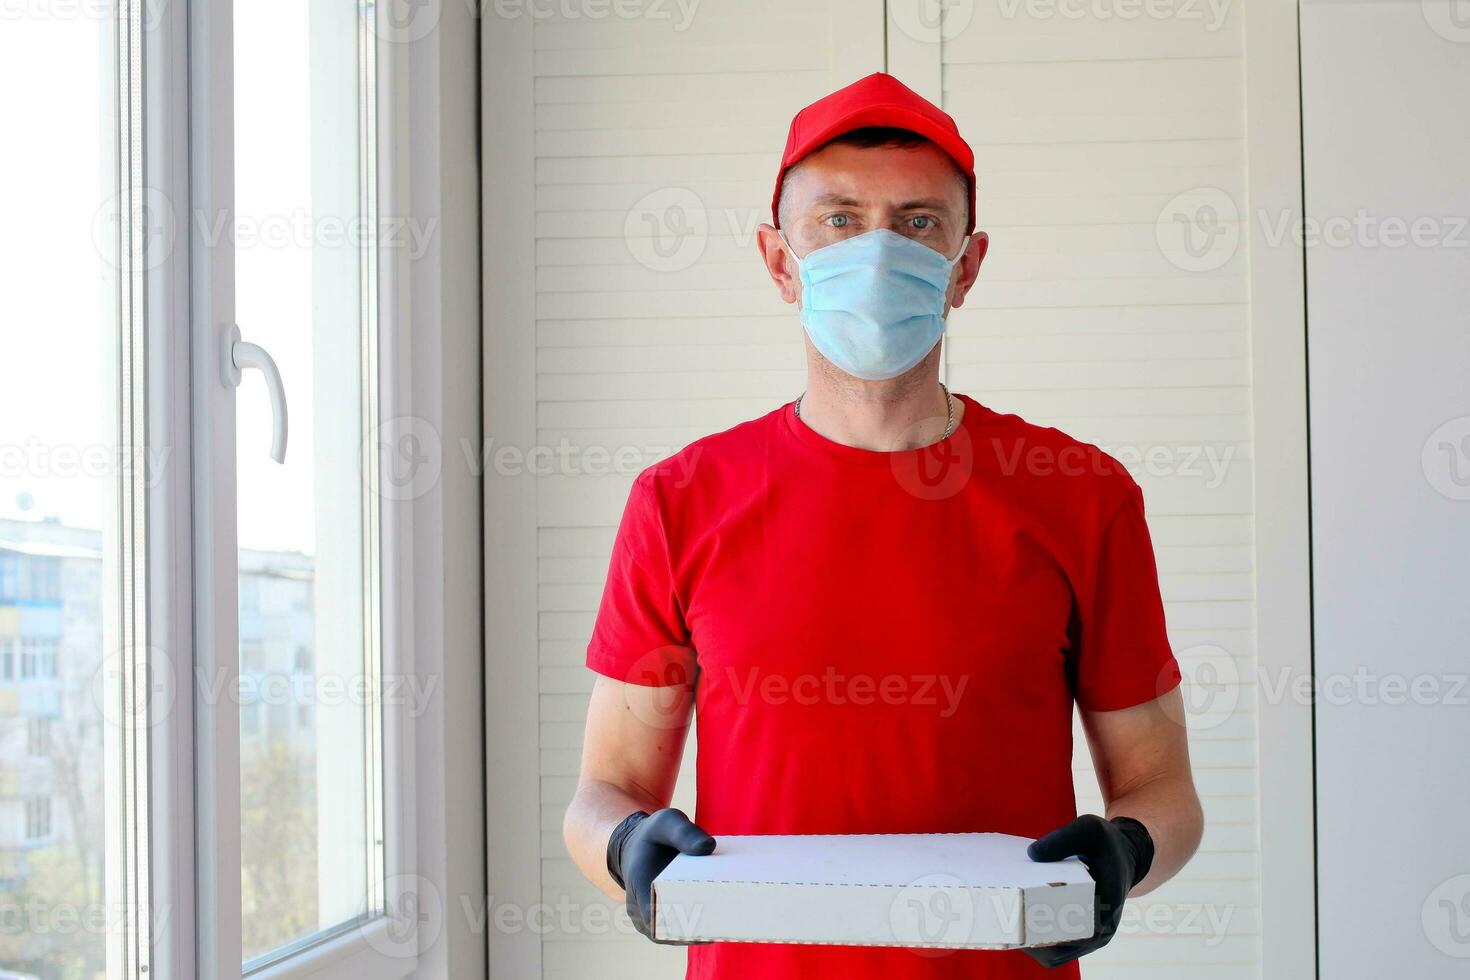 Delivery man employee in red cap blank t-shirt uniform face mask gloves hold  cardboard box pizza .  Service quarantine pandemic coronavirus virus 2019-ncov concept. photo